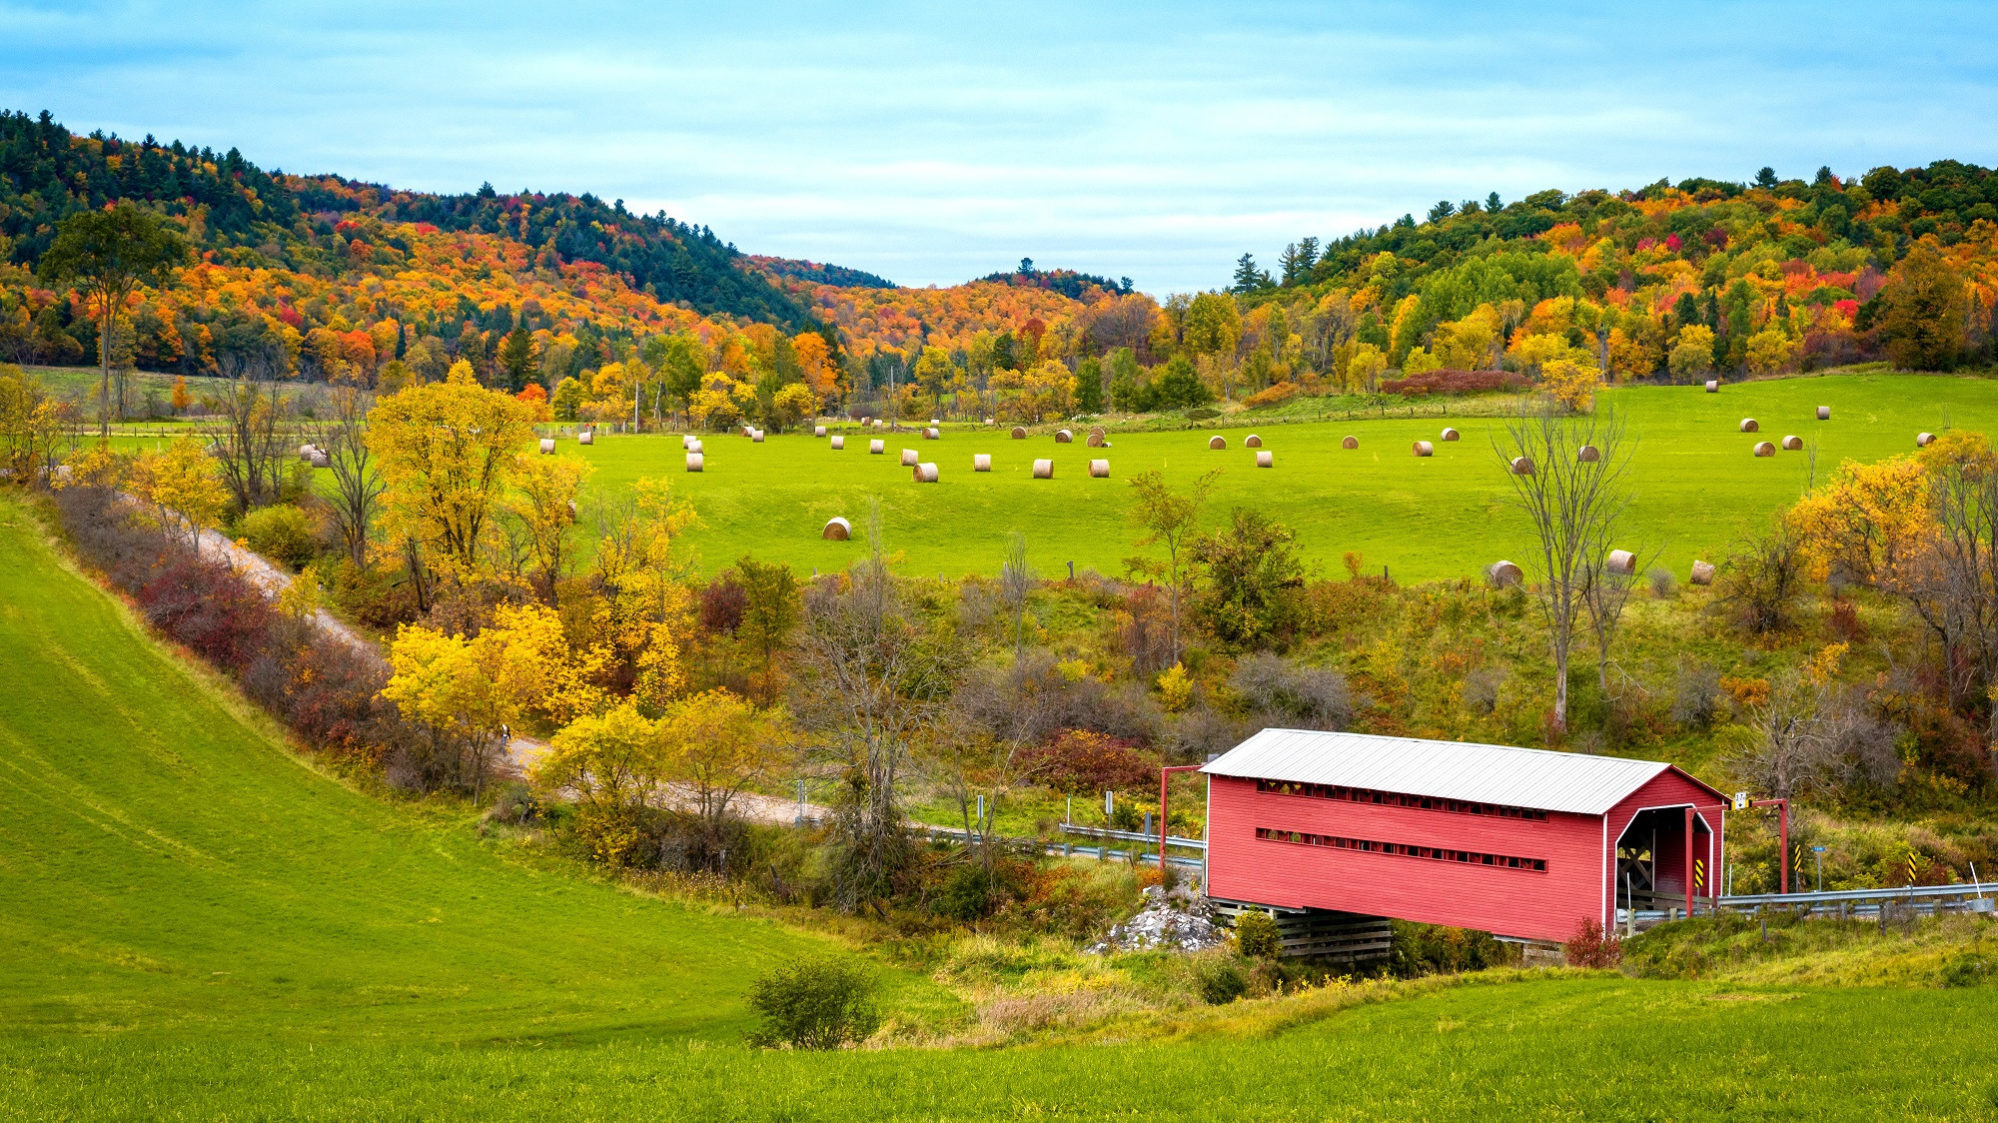 View of Meech Creek Valley in the fall. Scene of a covered bridge and haybales, with ochre- and orange-coloured trees in the background.